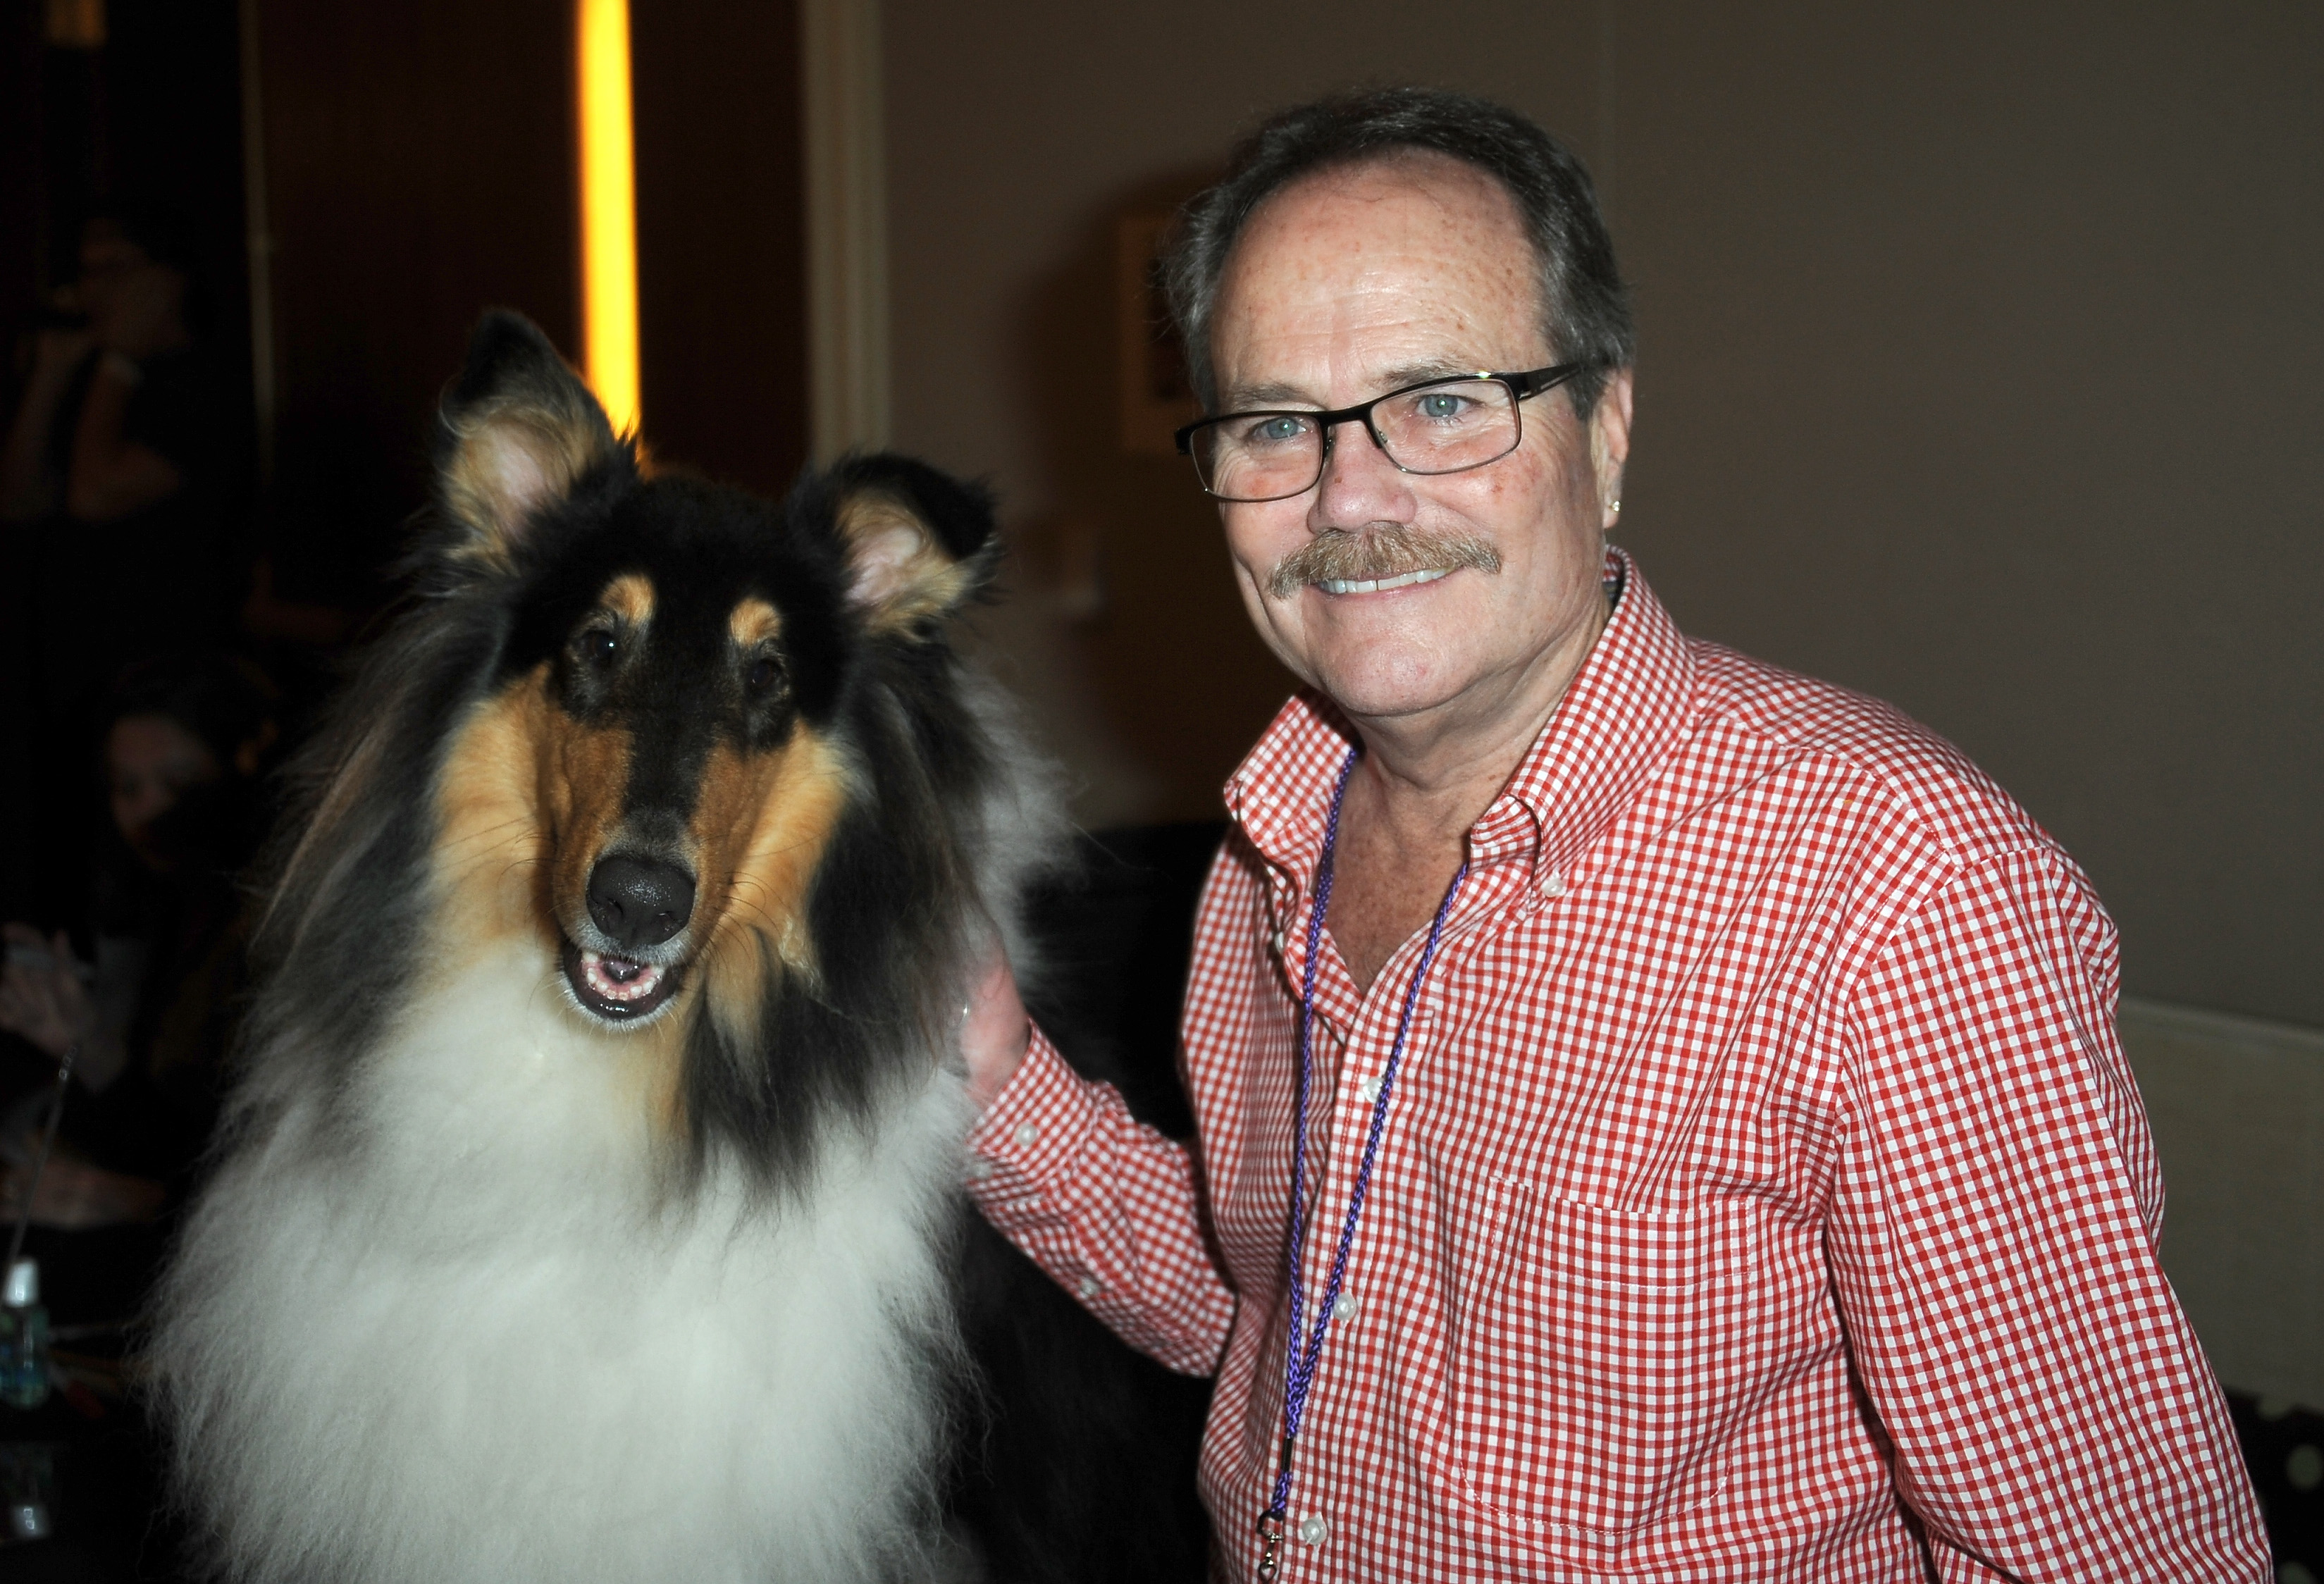 Lassie and Jon Provost at The Hollywood Show on July 13, 2013, in Los Angeles, California | Source: Getty Images